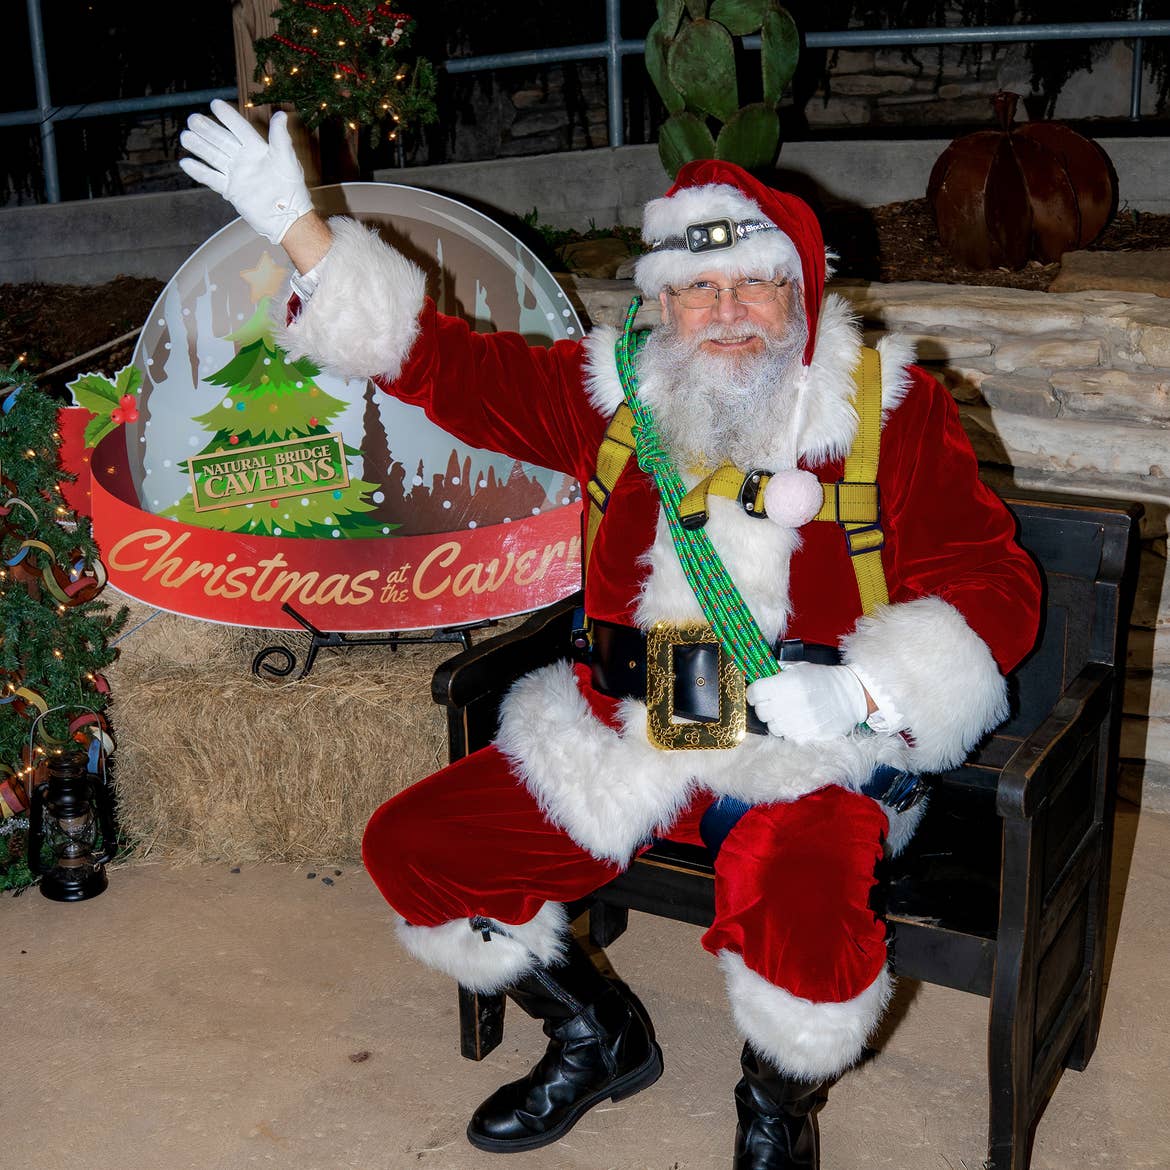 Santa 'Spelunker' Clause sits wearing his red suit, and climbing harness while waving to guests from a black bench in front of a snow globe that reads, 'Christmas & Caverns.'